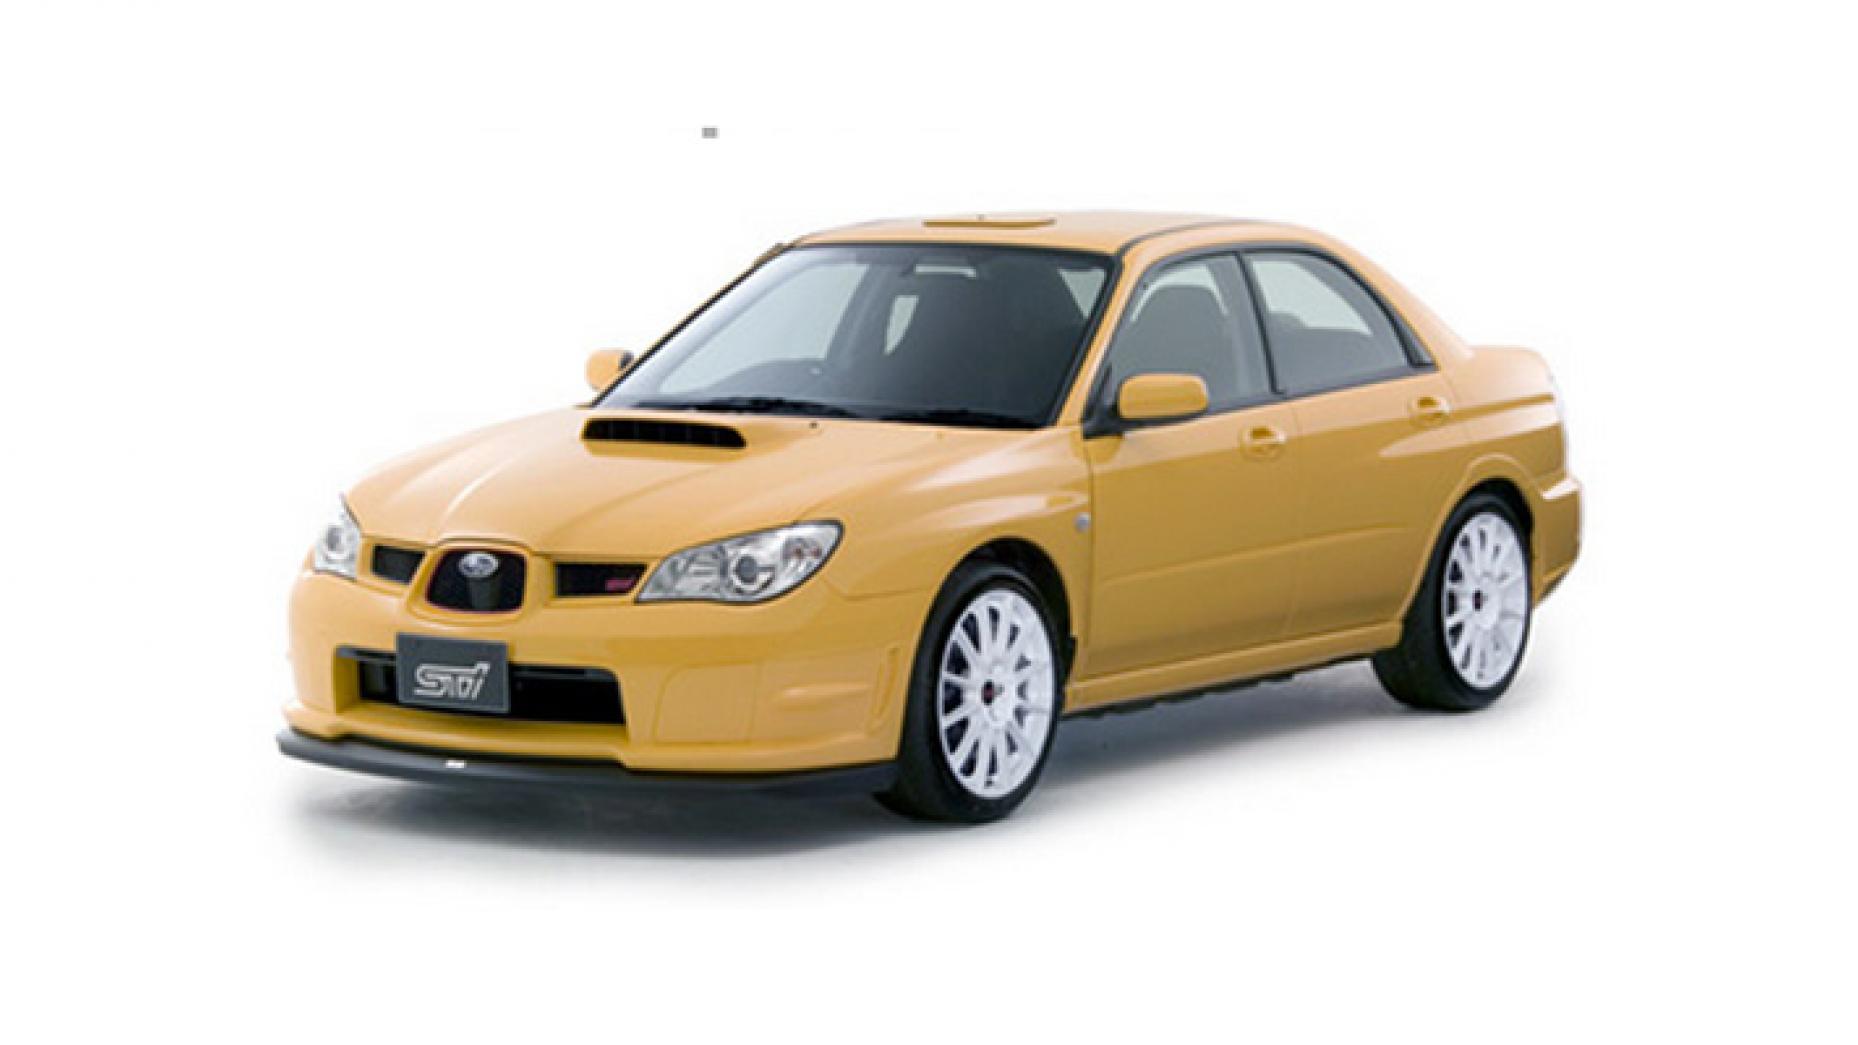 1. Subaru was not afraid of elaborately named special editions